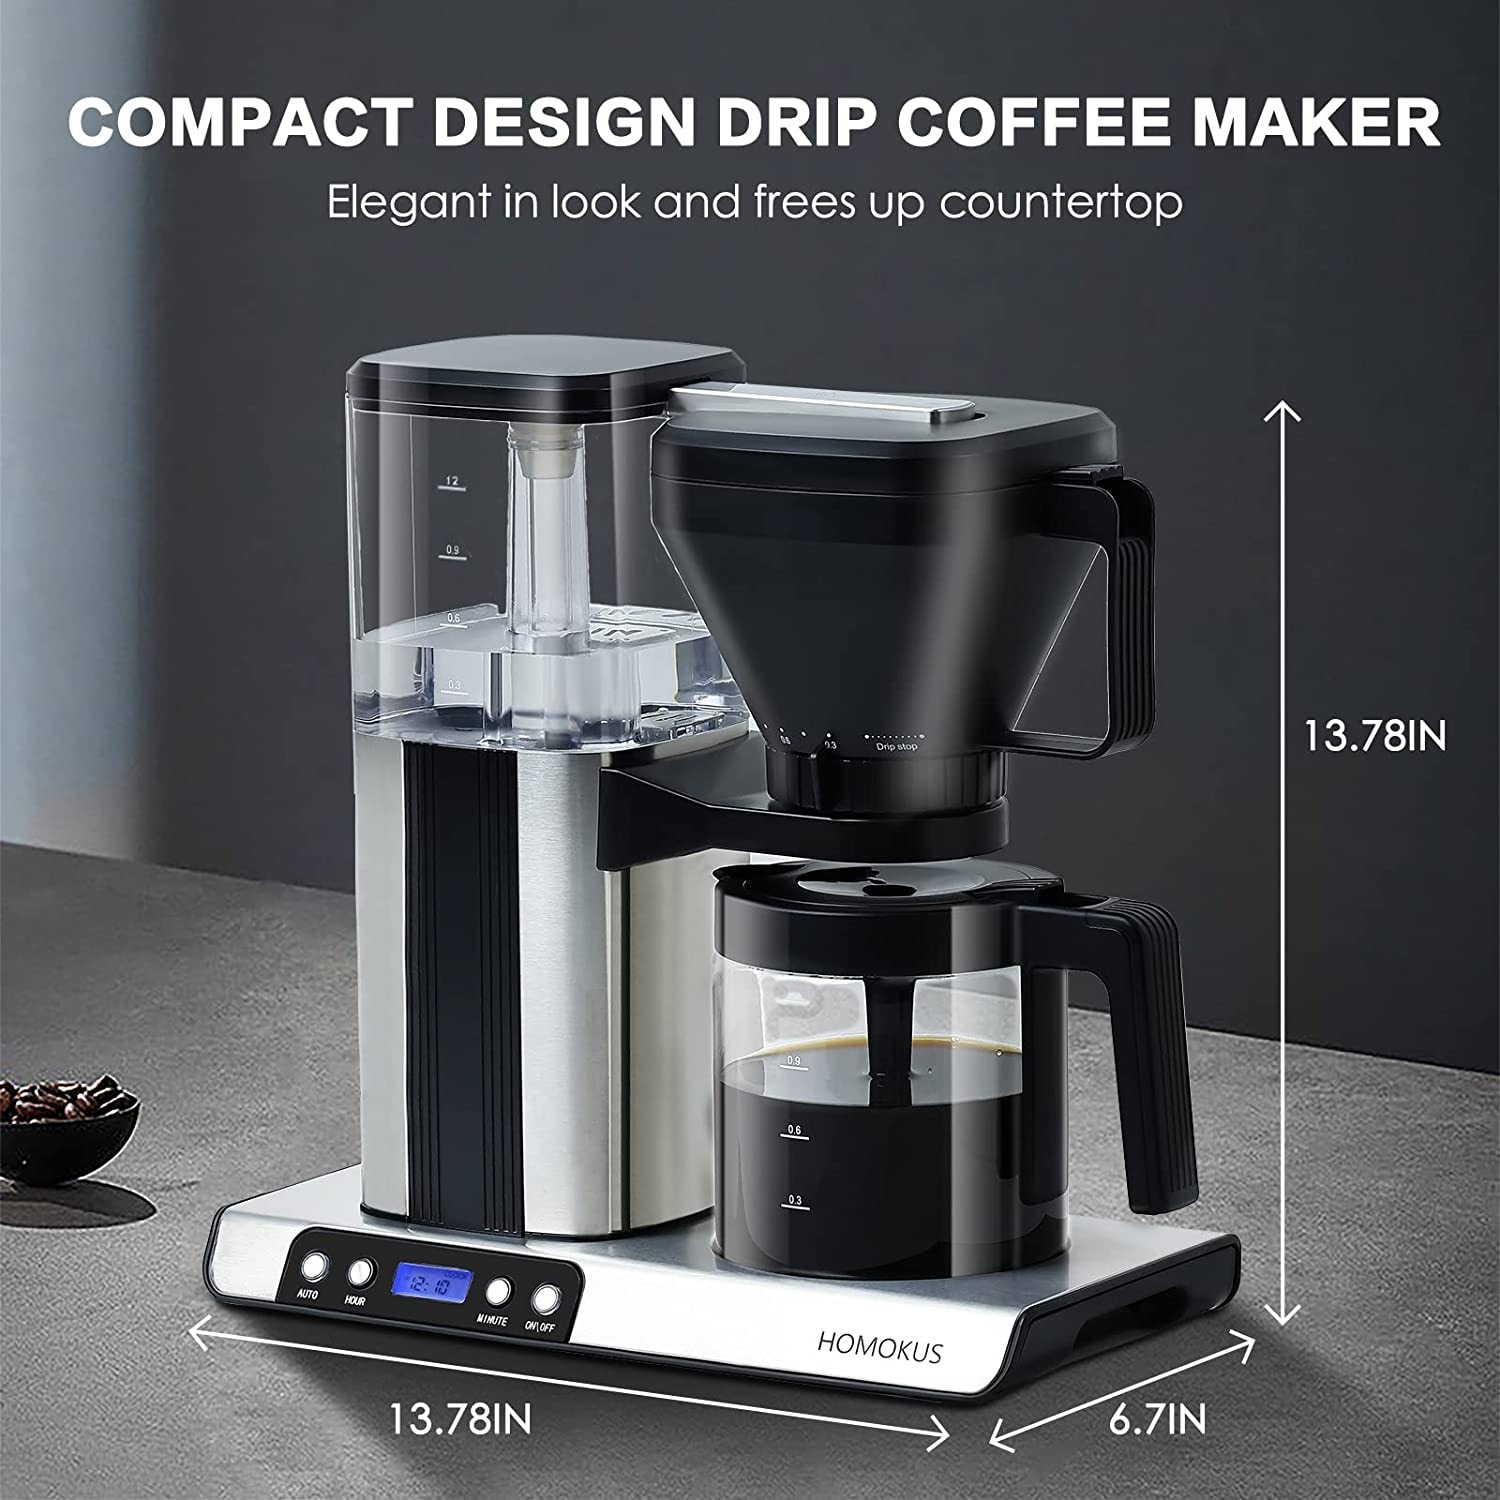 https://ak1.ostkcdn.com/images/products/is/images/direct/949515f1ccc8e3ce7cbe3c7bd7337857e2e0efd0/8-Cup-Drip-Coffee-Maker---Stainless-Steel-Coffee-Maker---Programmable-Coffee-Maker-with-Timer.jpg